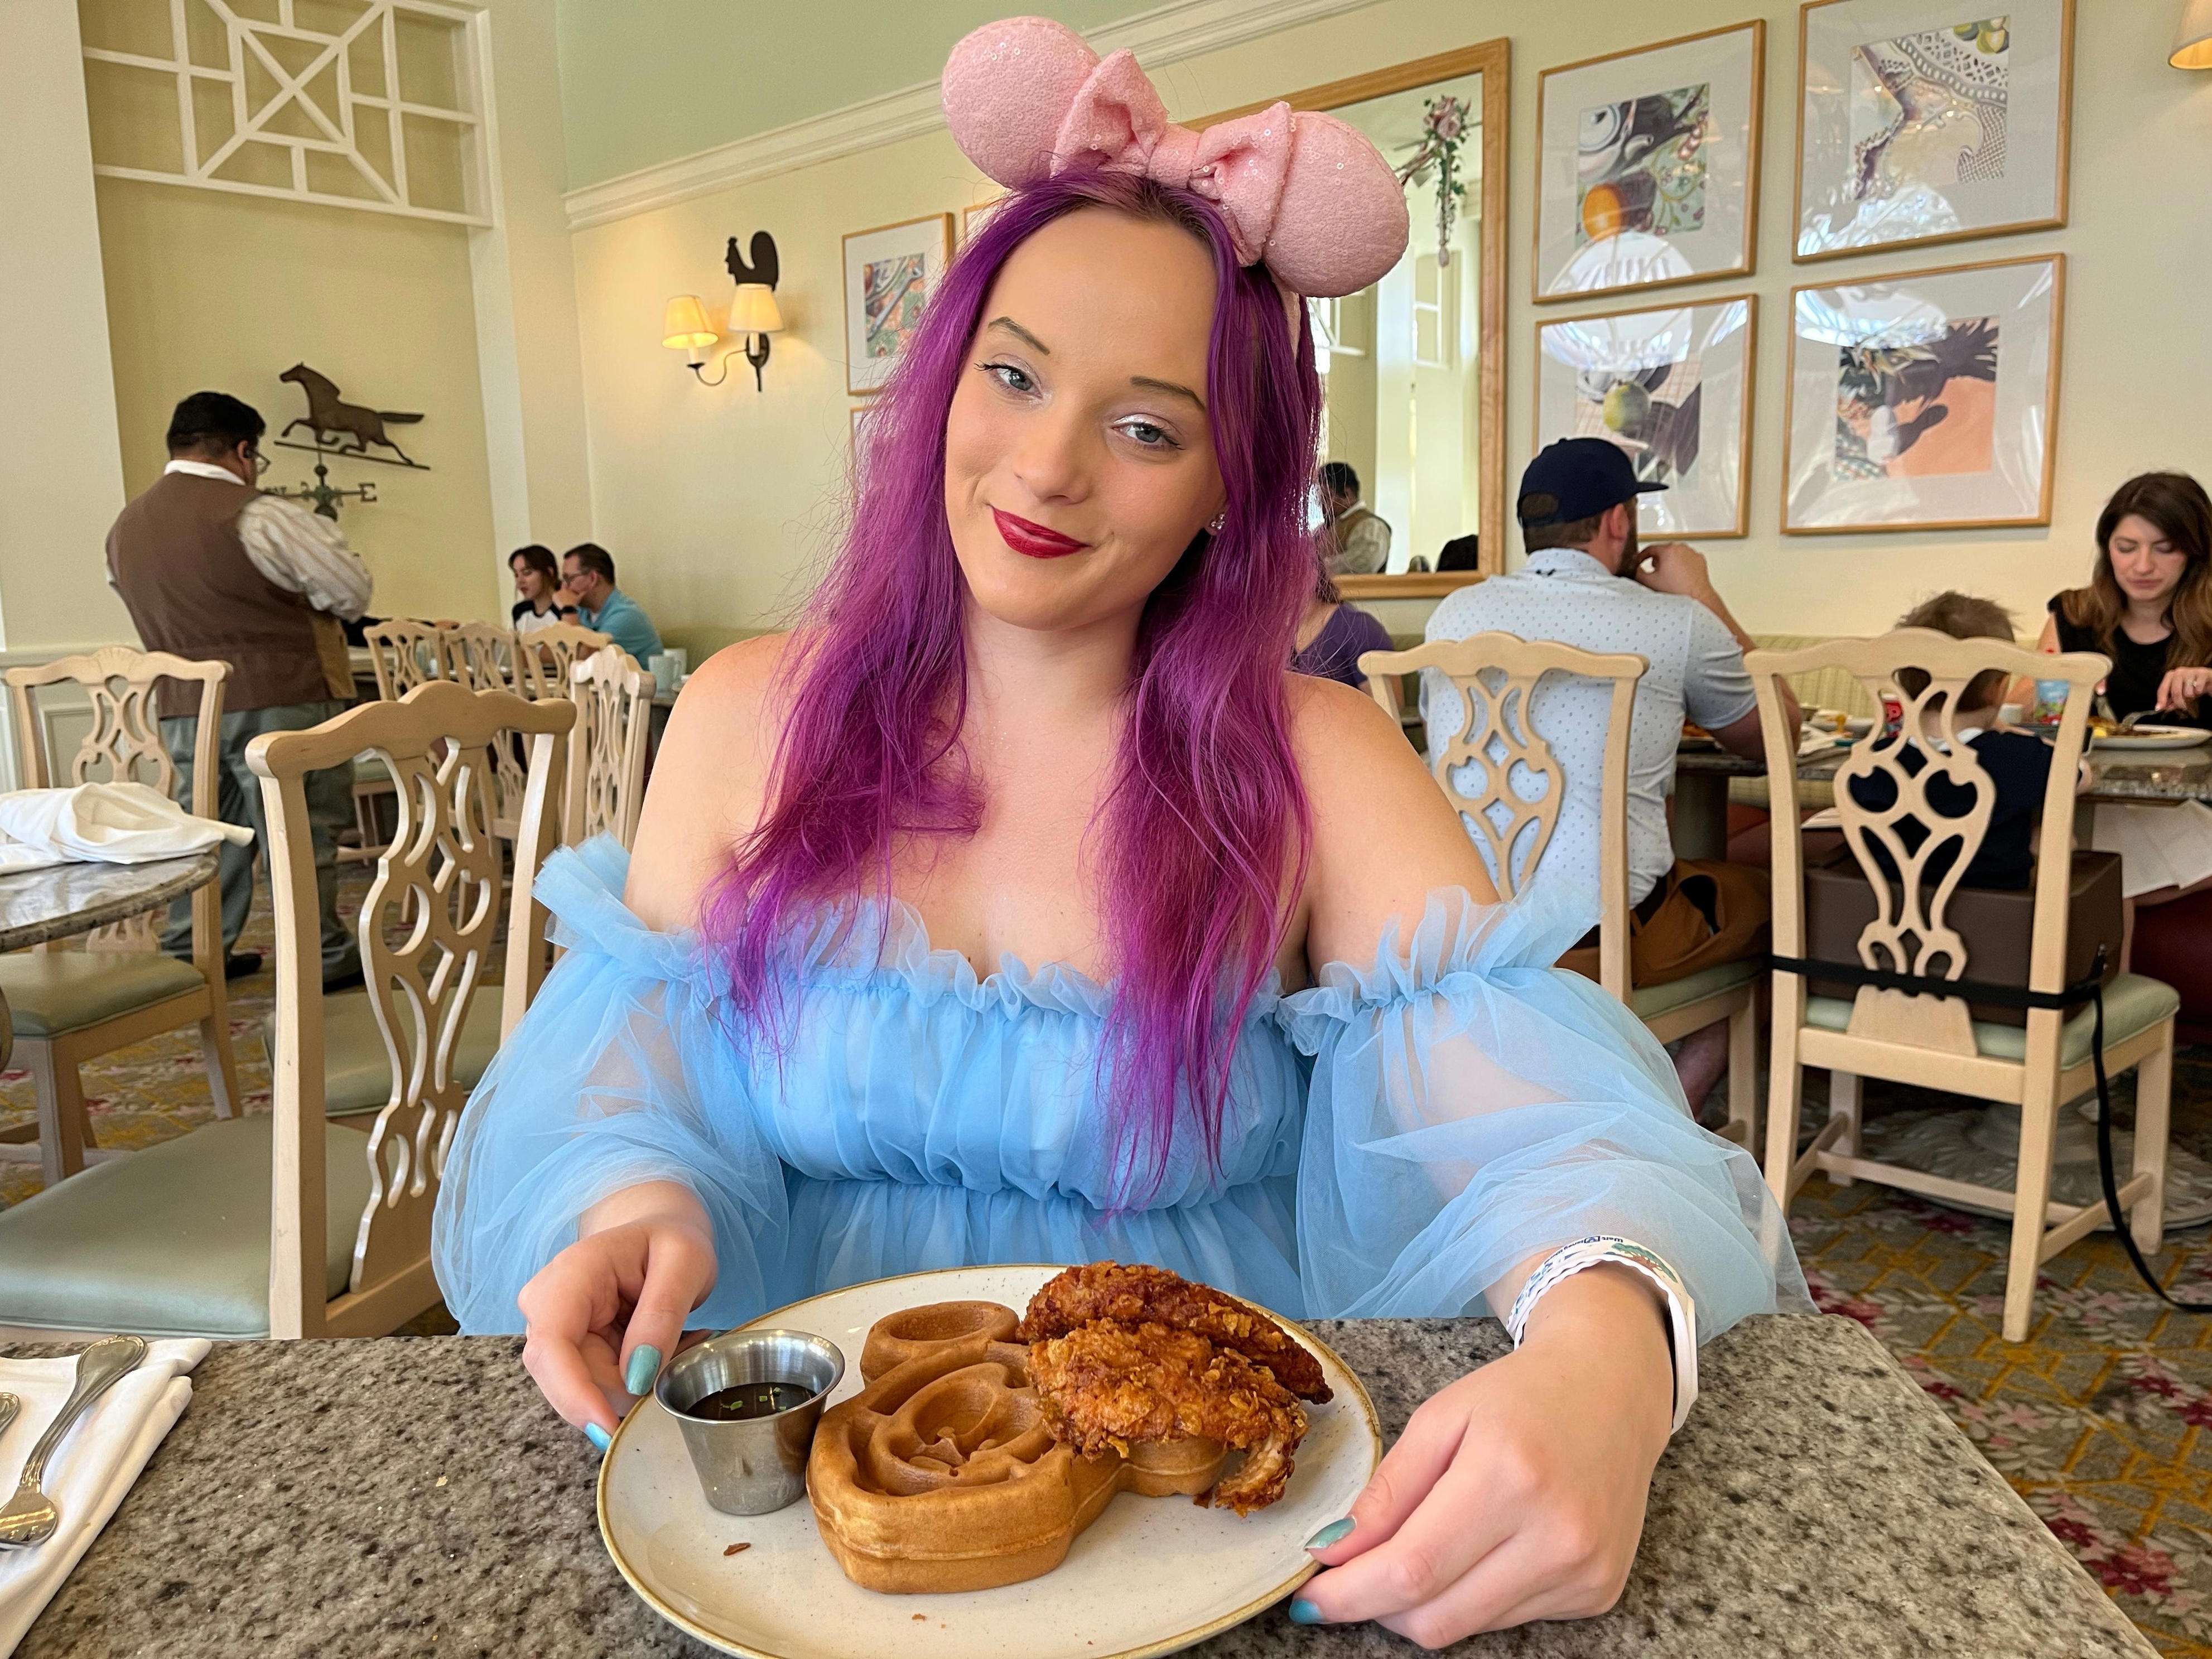 <p>I appreciated that the meal was served with a gigantic Mickey-shaped waffle as opposed to a regular waffle. It added to the magic of dining at Disney. </p><p>I ordered the sriracha on the side because I thought it was going to be spicy. But I ended up not being spicy at all, which I liked. </p>